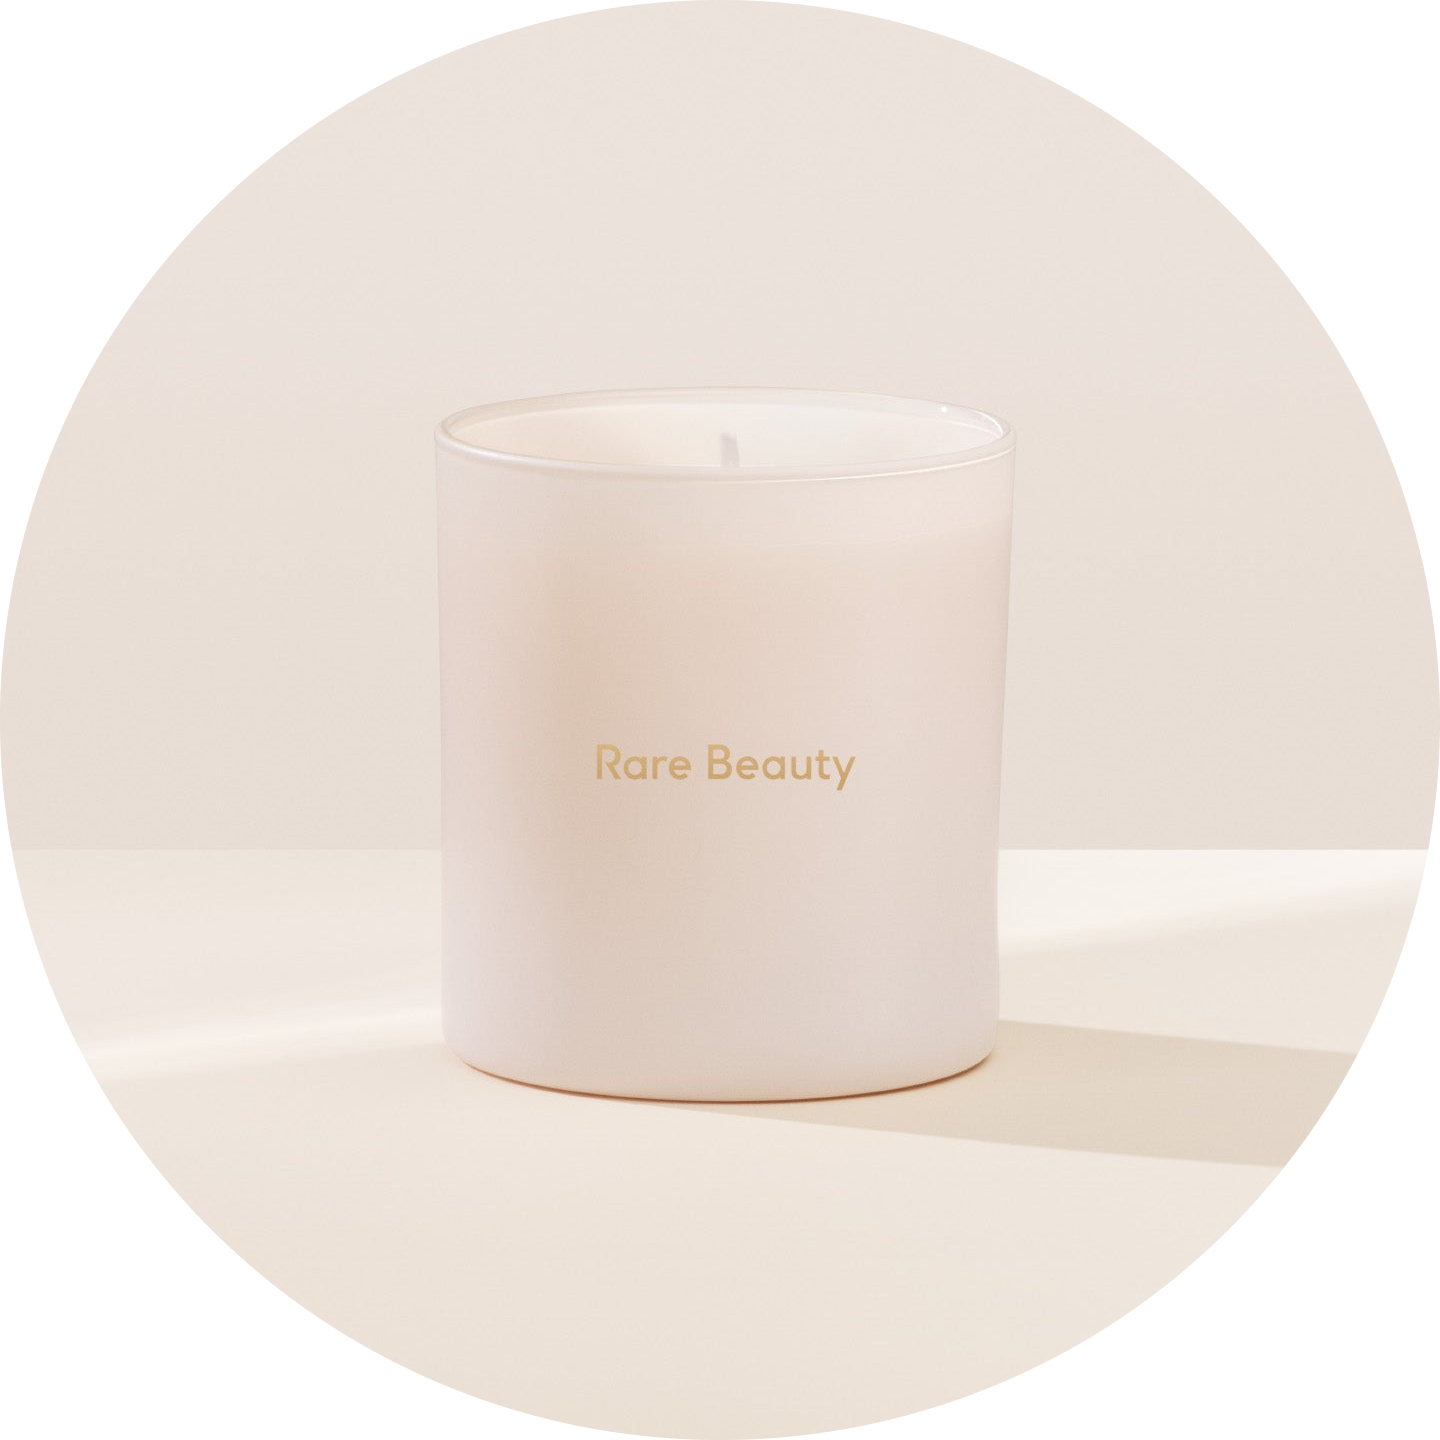 Rare Beauty Scented Candle NudeFace Chile